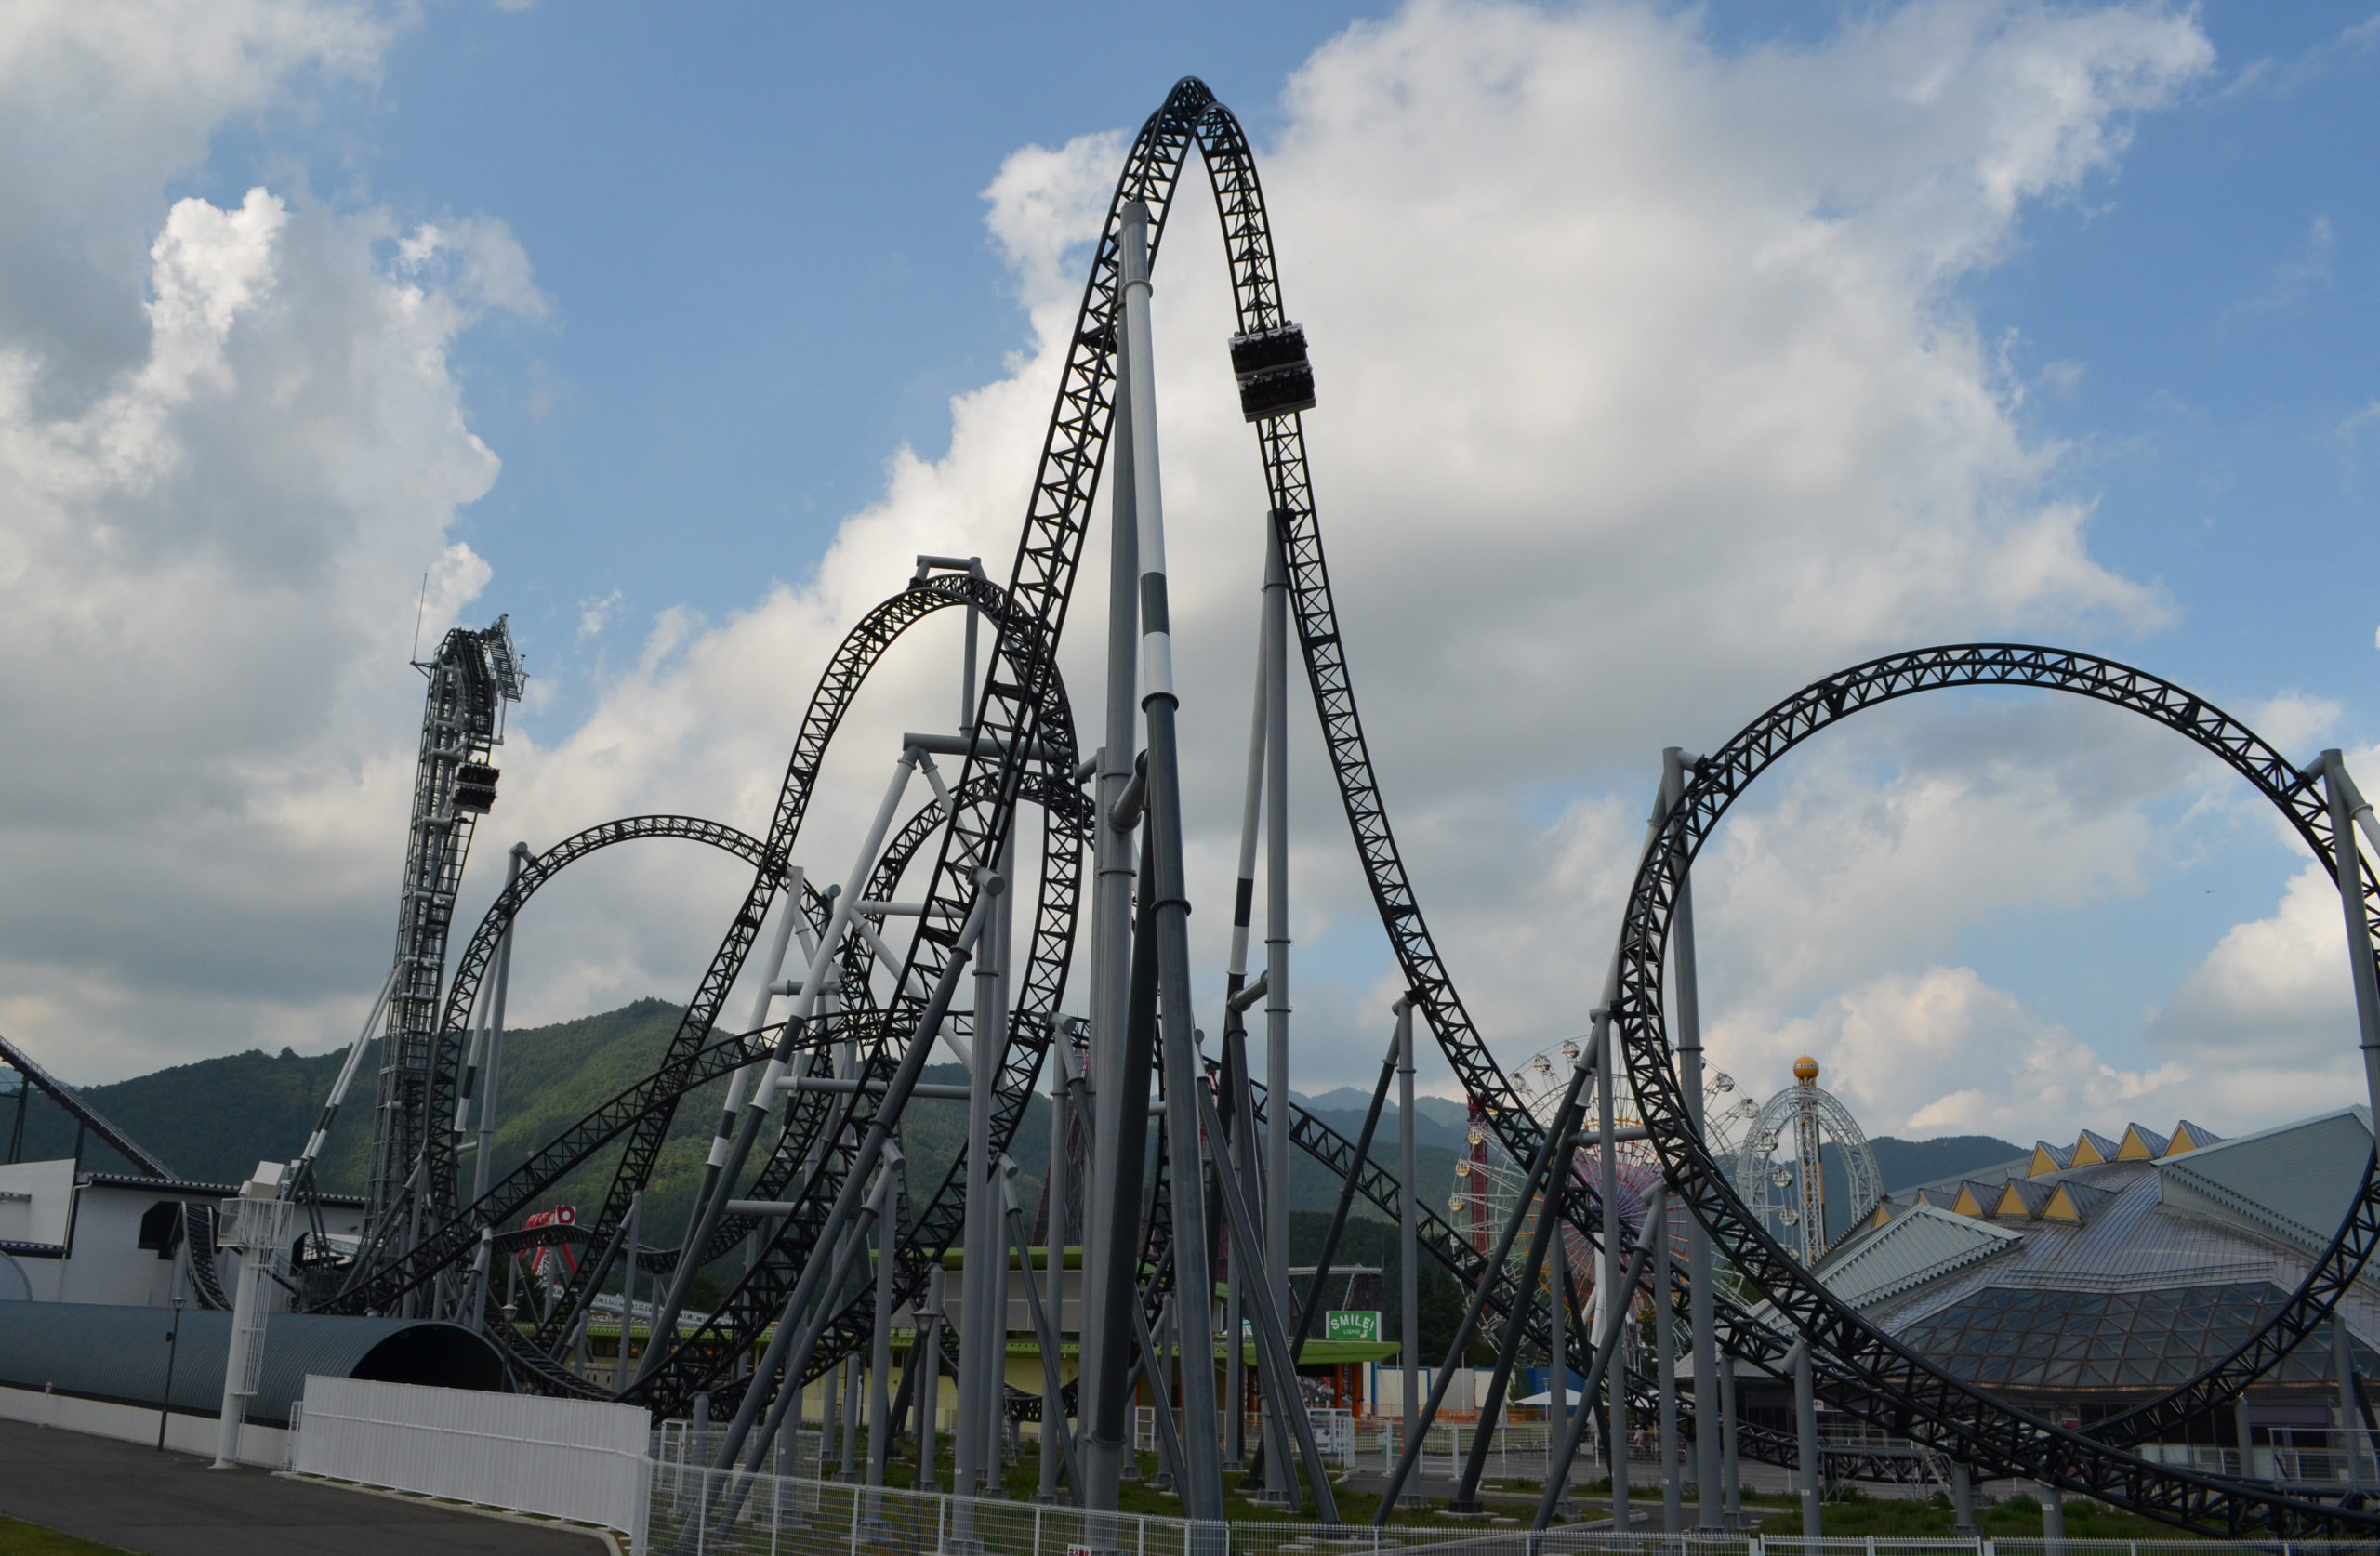 What Is The Most Popular Roller Coaster